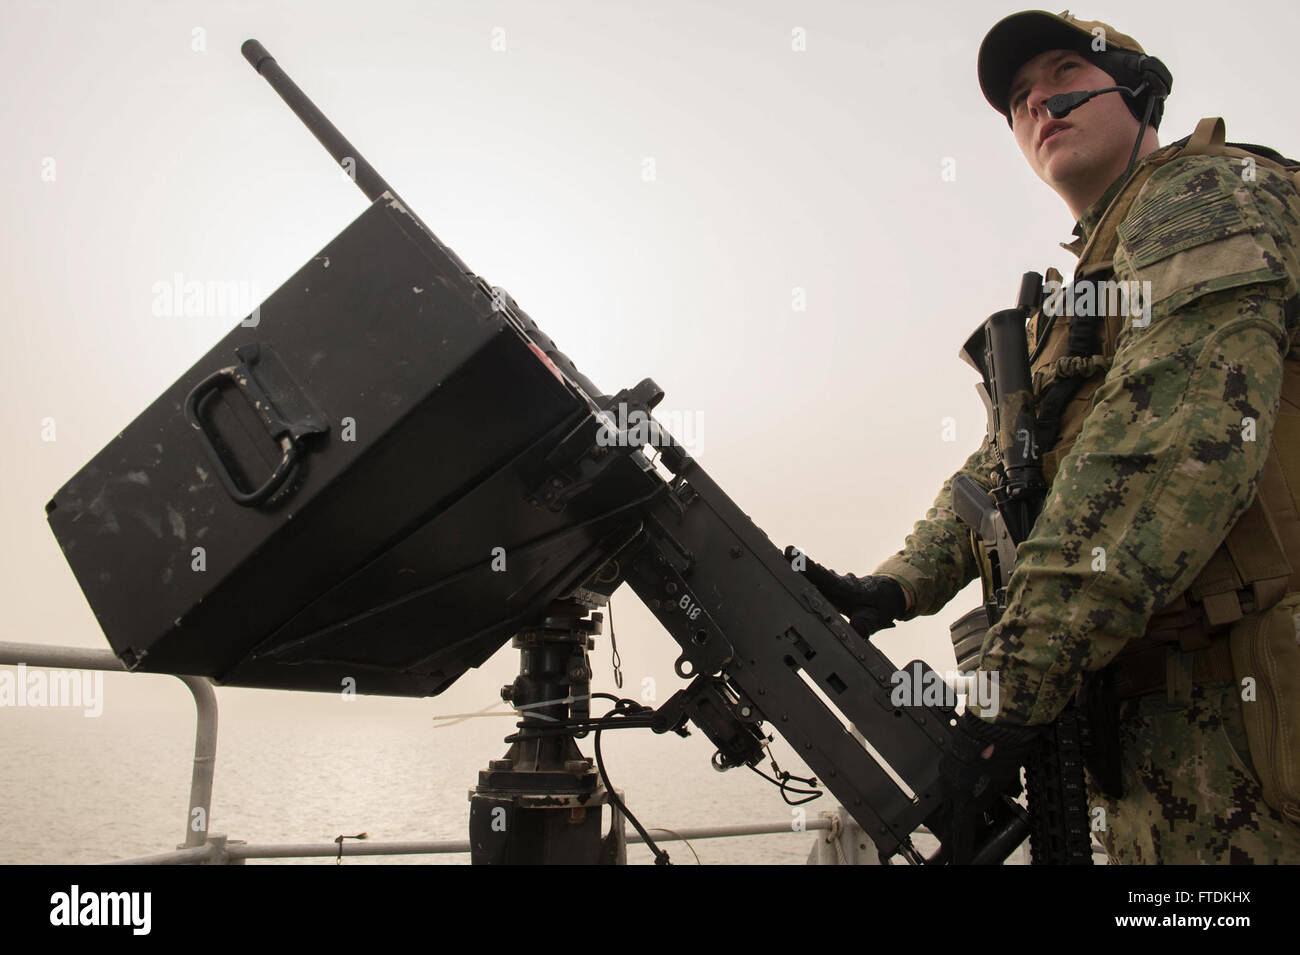 160126-N-WV703-007 ATLANTIC OCEAN (Jan. 26, 2016) Master-at-Arms 3rd Class Travis Moose, from Hazleton, Pennsylvania, stands a .50-caliber machine gun watch as a member of the embarked security team aboard USNS Spearhead (T-EPF 1) Jan. 26, 2016. The Military Sealift Command expeditionary fast transport vessel USNS Spearhead is on a scheduled deployment in the U.S. 6th Fleet area of operations to support the international collaborative capacity-building program Africa Partnership Station. (U.S. Navy photo by Mass Communication Specialist 3rd Class Amy M. Ressler/Released) Stock Photo